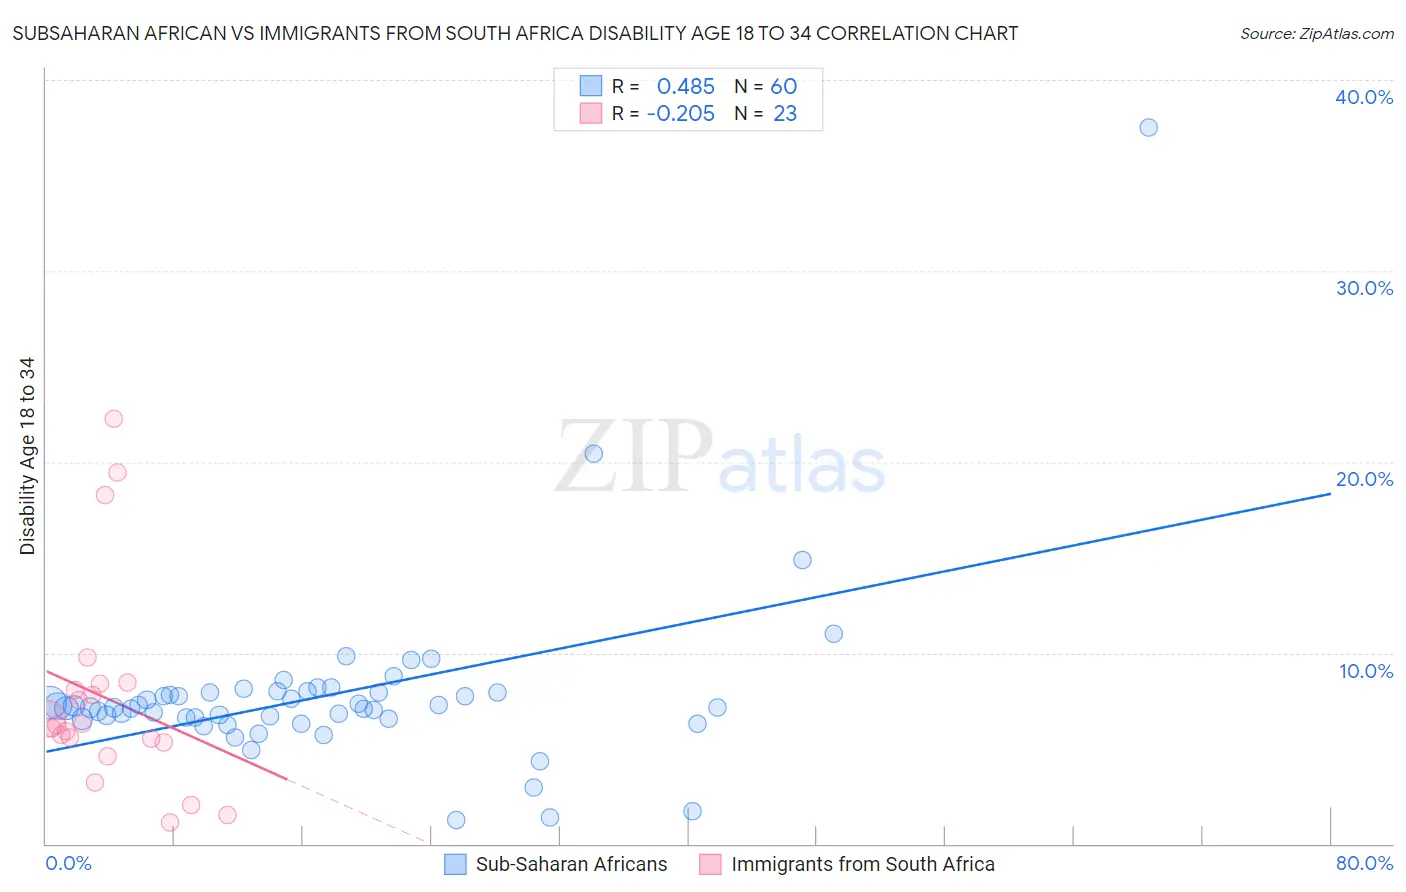 Subsaharan African vs Immigrants from South Africa Disability Age 18 to 34